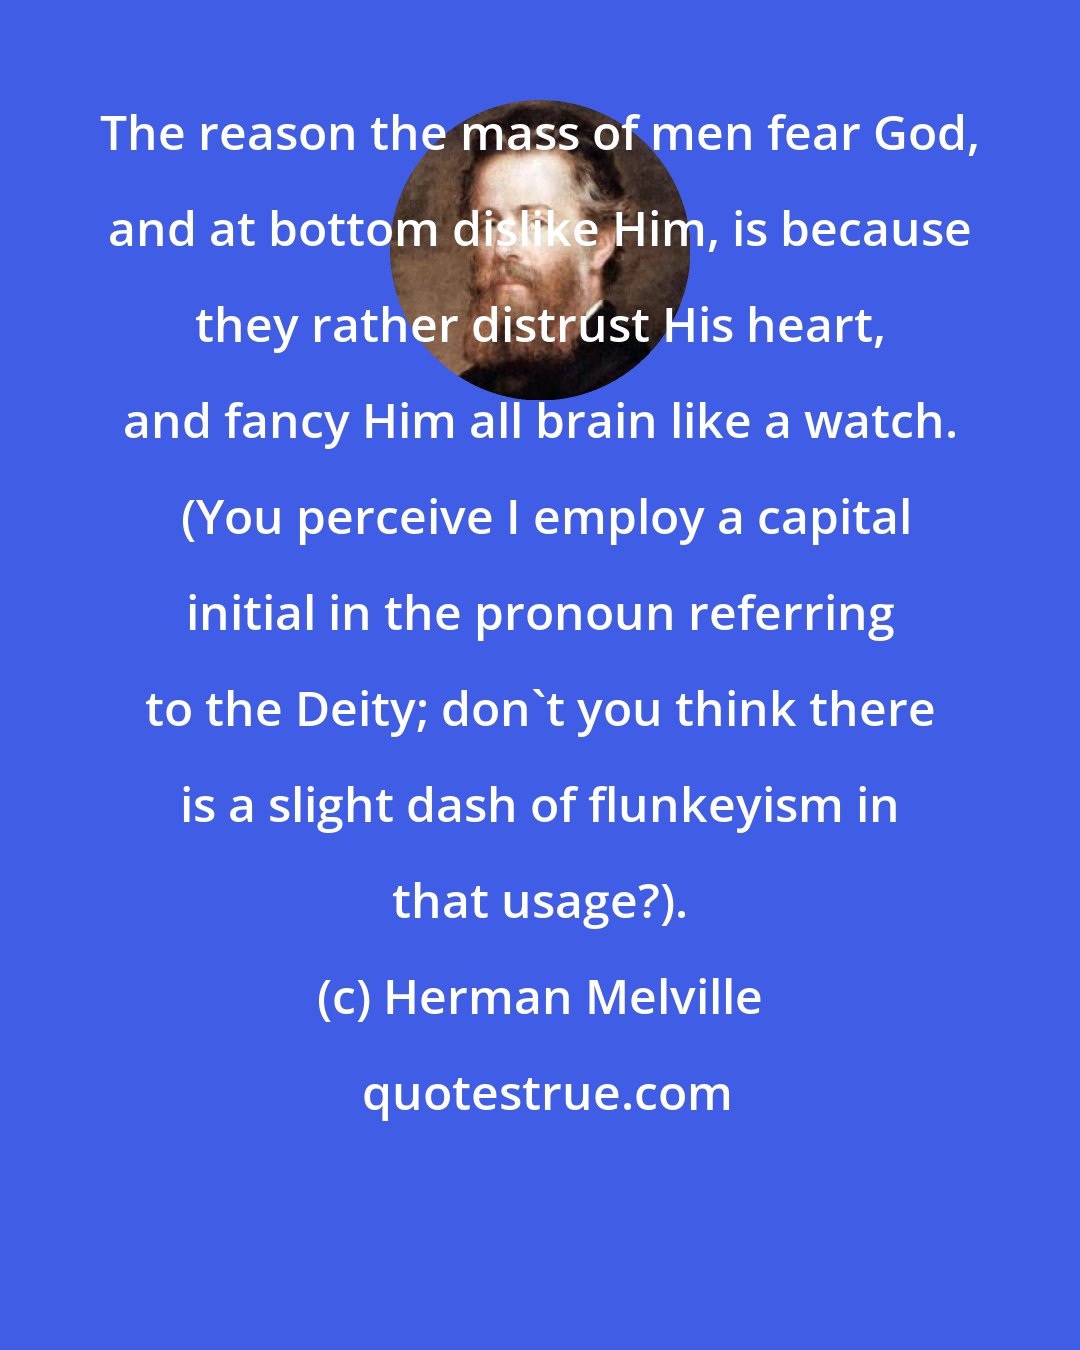 Herman Melville: The reason the mass of men fear God, and at bottom dislike Him, is because they rather distrust His heart, and fancy Him all brain like a watch.  (You perceive I employ a capital initial in the pronoun referring to the Deity; don't you think there is a slight dash of flunkeyism in that usage?).